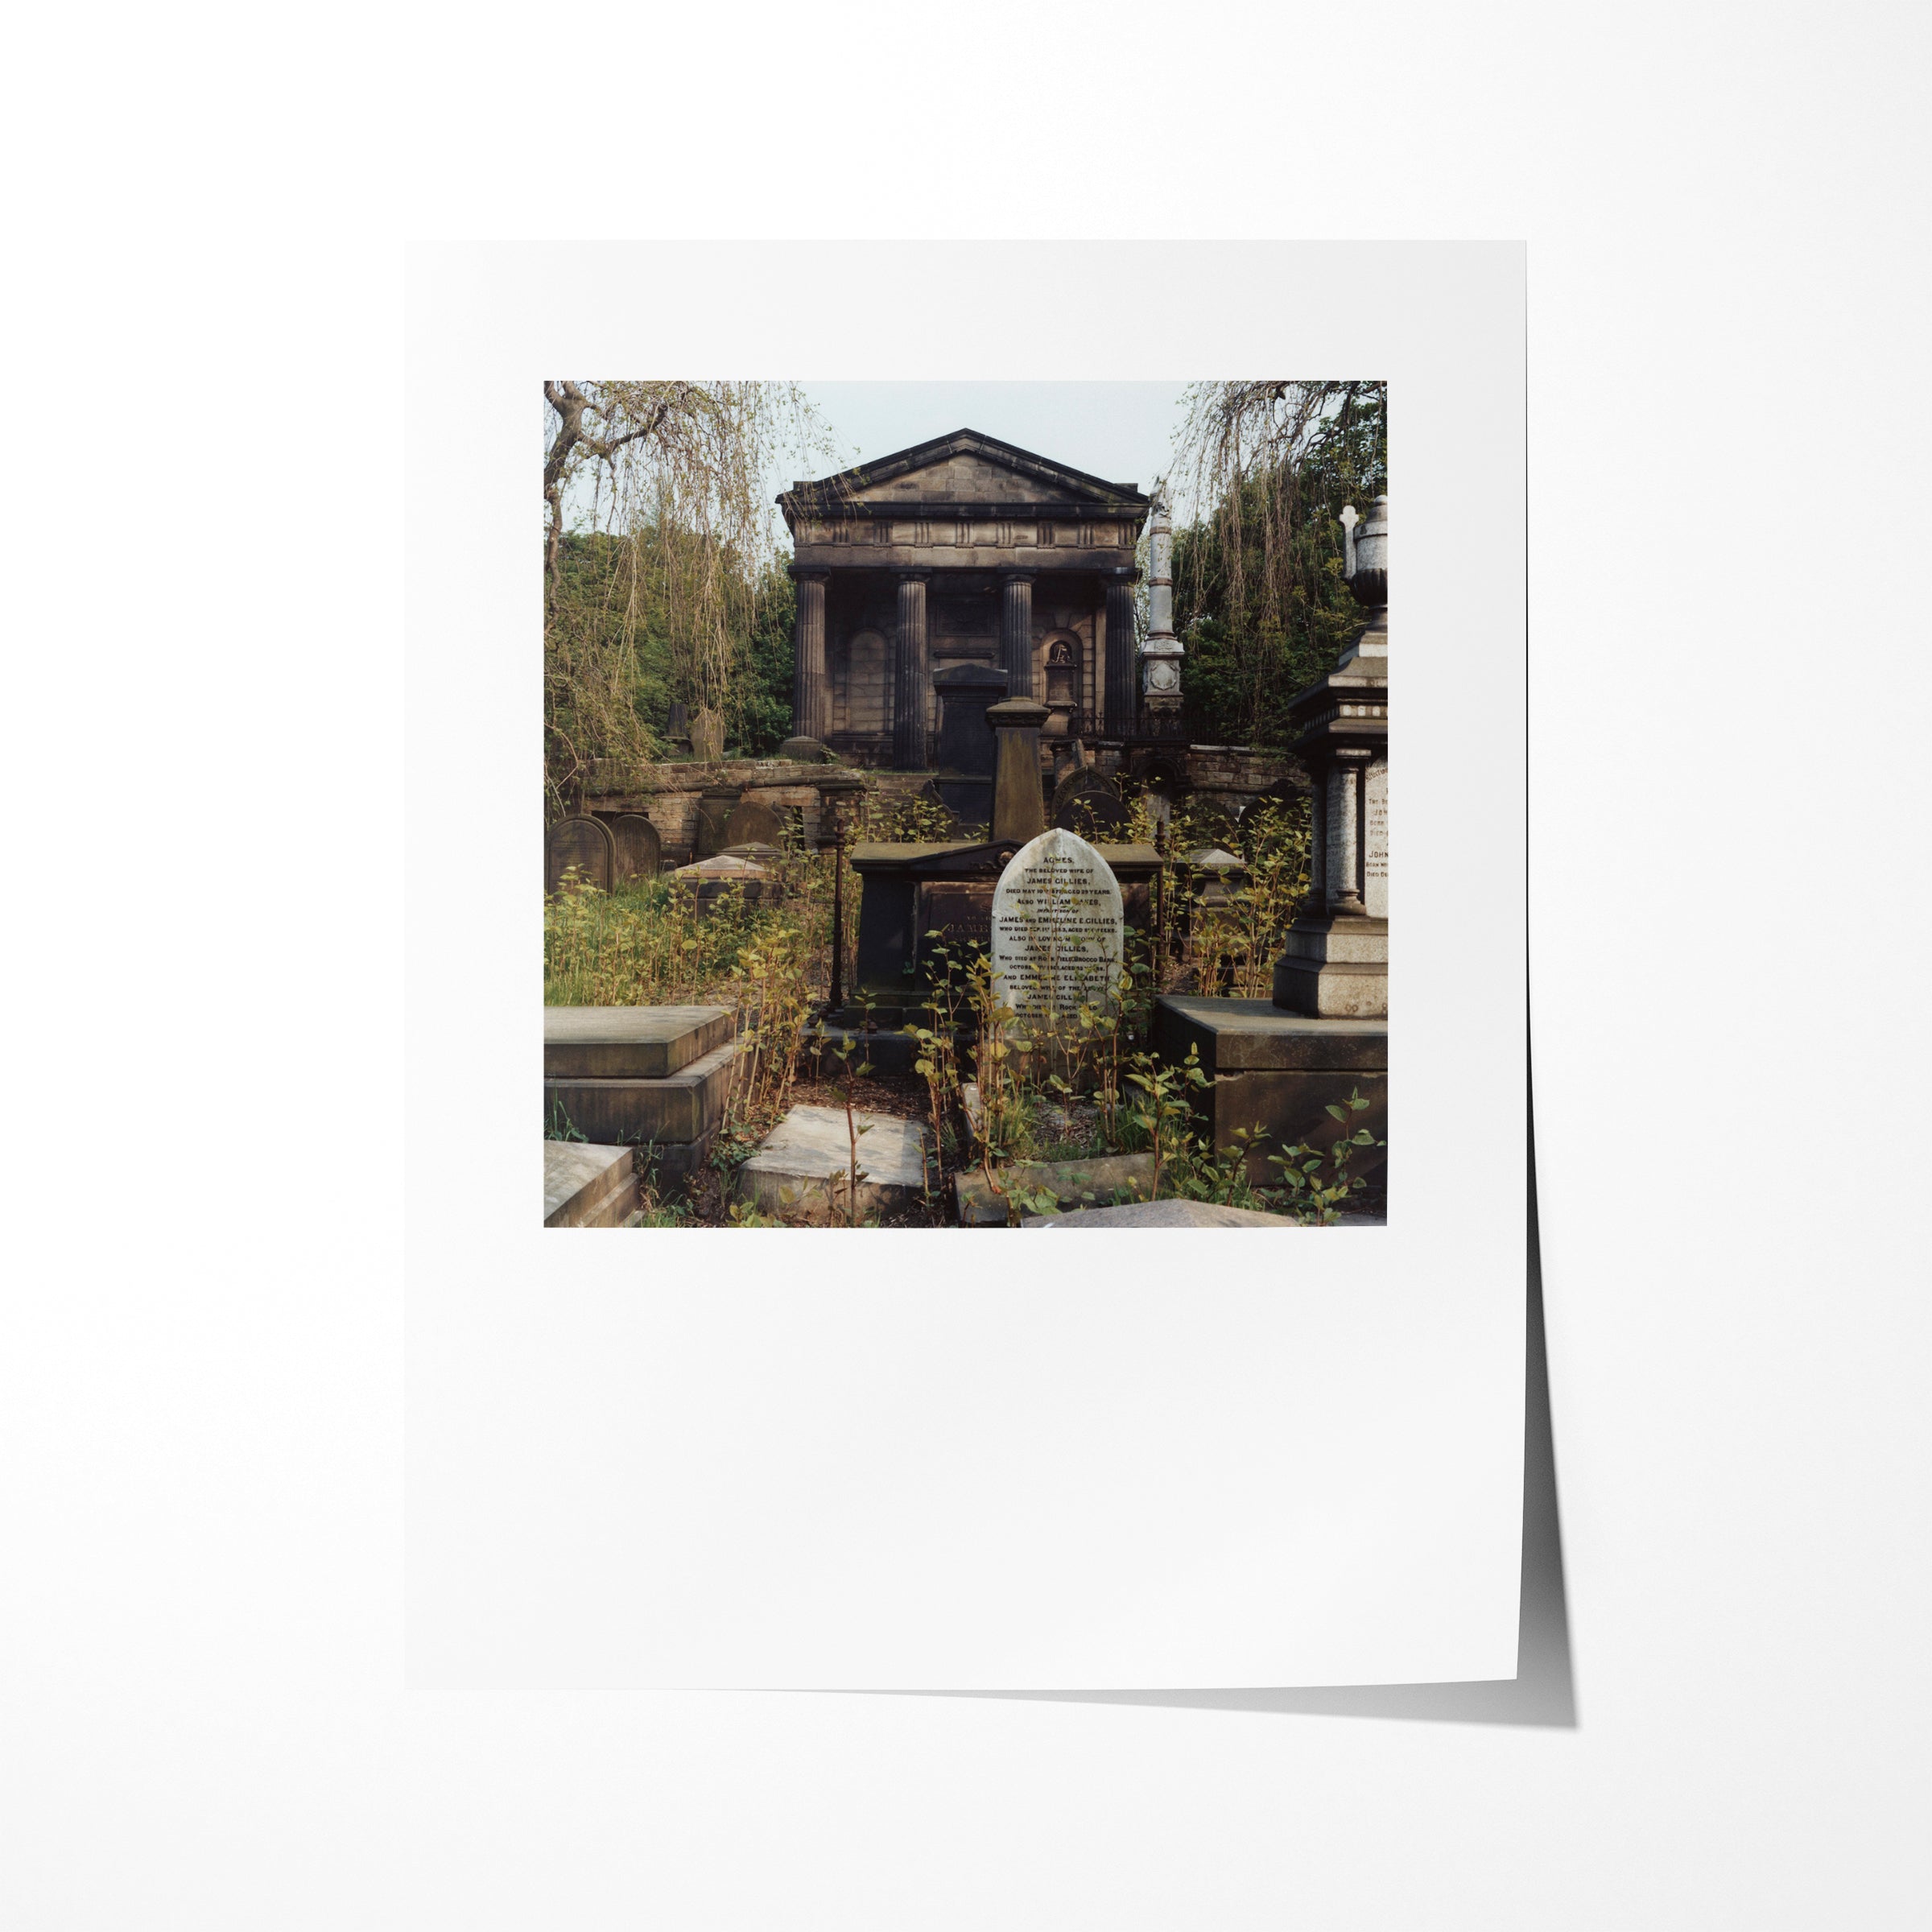 The General Cemetary, Sheffield, 1978 - 7x9" Print